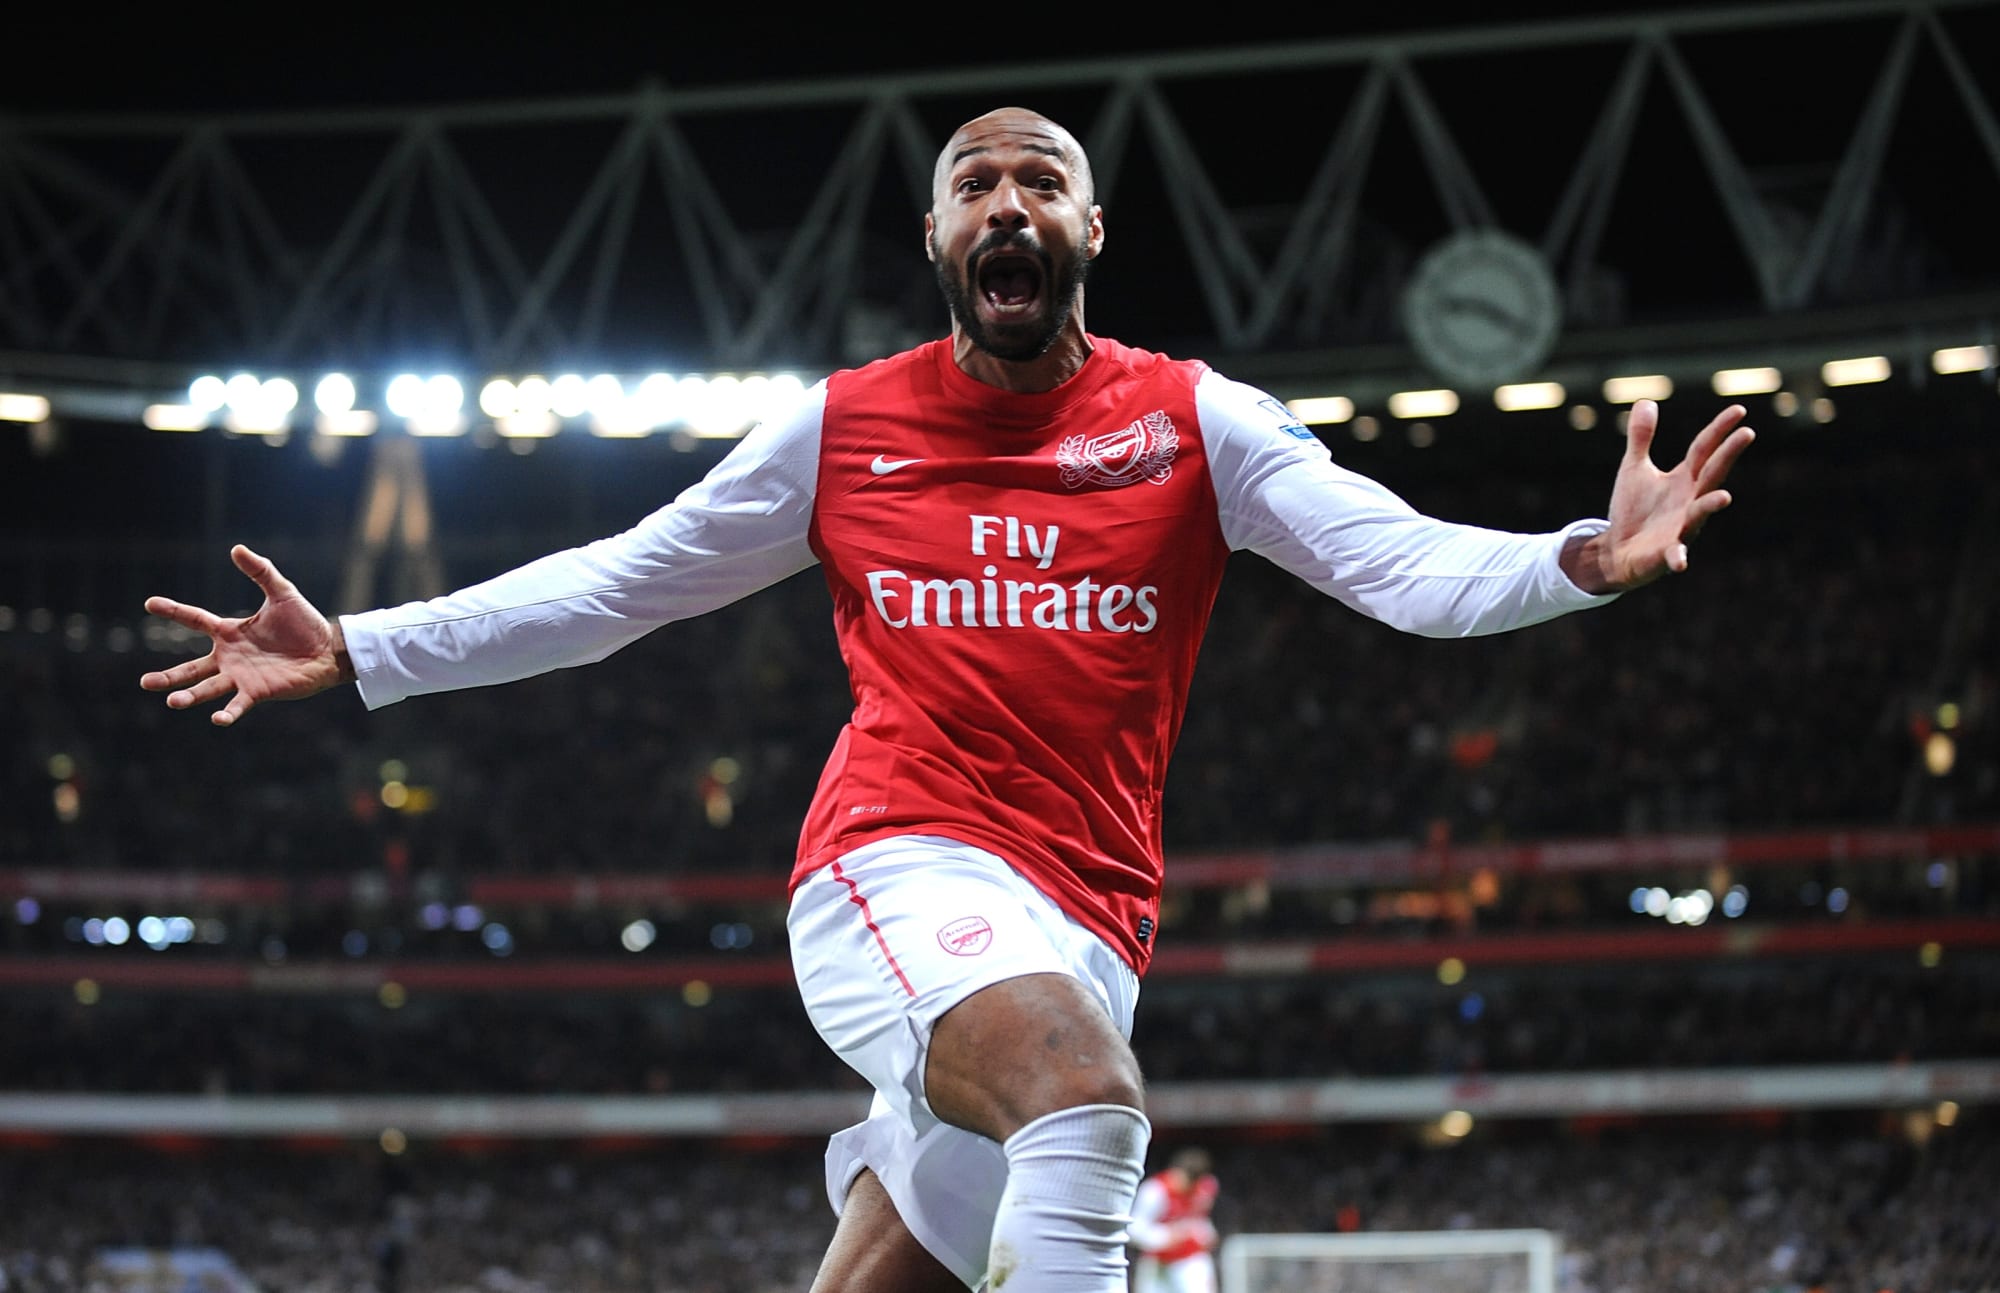 Thierry Henry 'Time Travels' Through Classic Soccer Moments in Sky